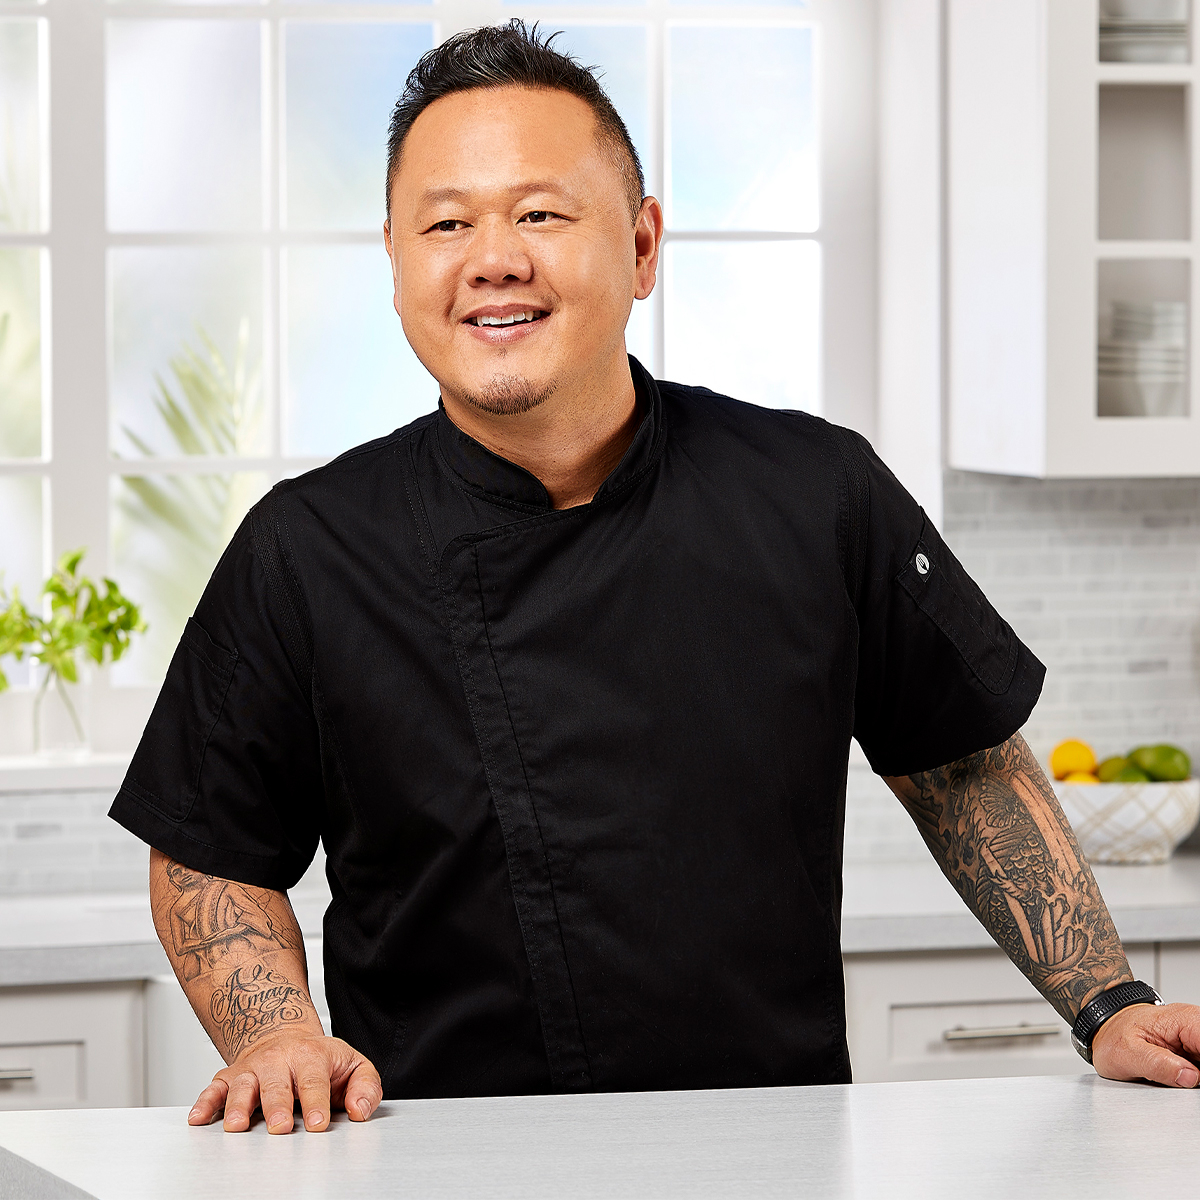 Chef Jet Tila Shares What’s in His Kitchen